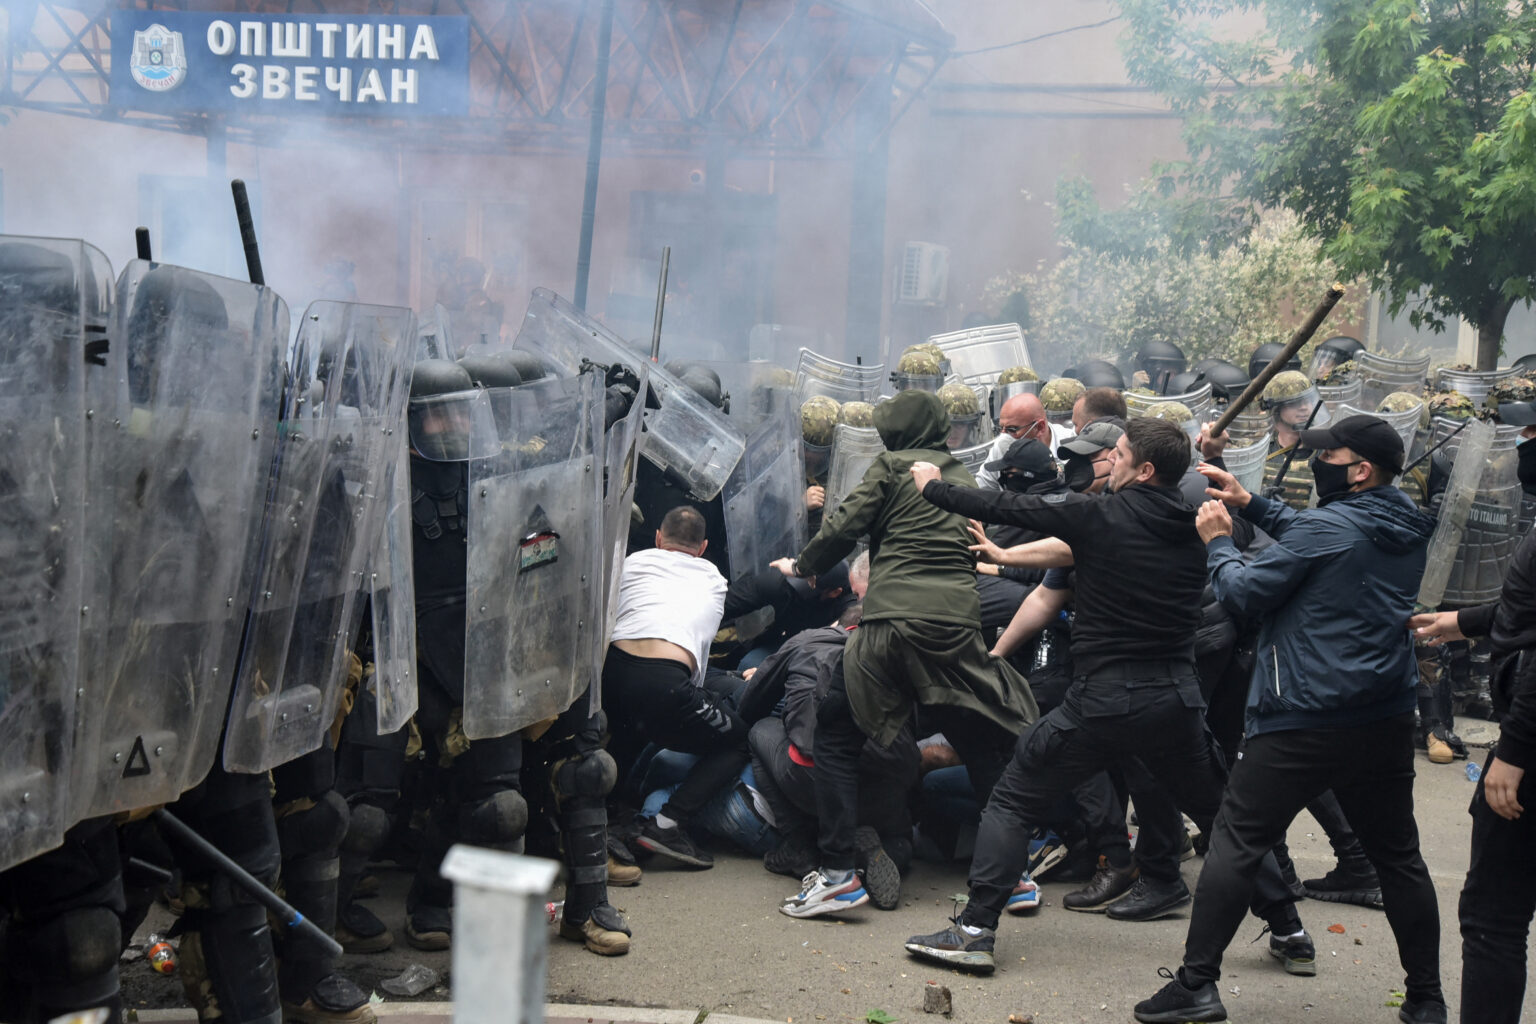 NATO Kosovo Force (KFOR) soldiers clash with local Kosovo Serb protesters in the town of Zvecan